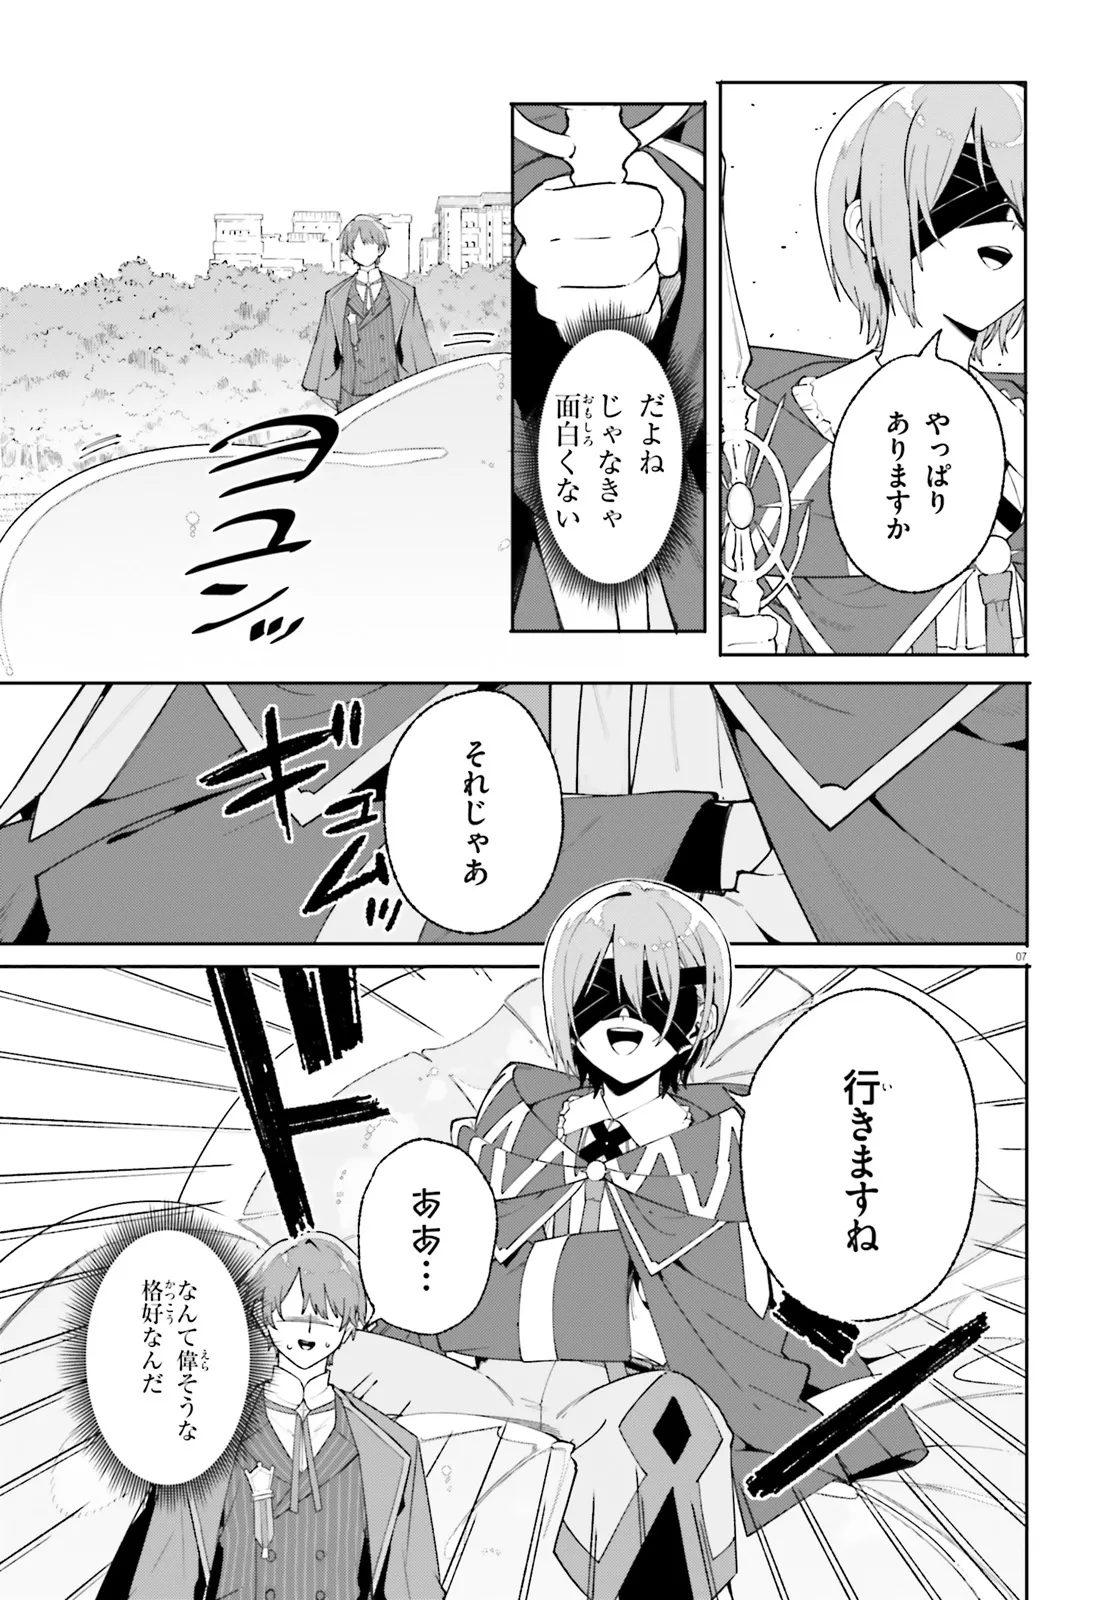 Kunon the Sorcerer Can See Kunon the Sorcerer Can See Through 魔術師クノンは見えている 第27.1話 - Page 7